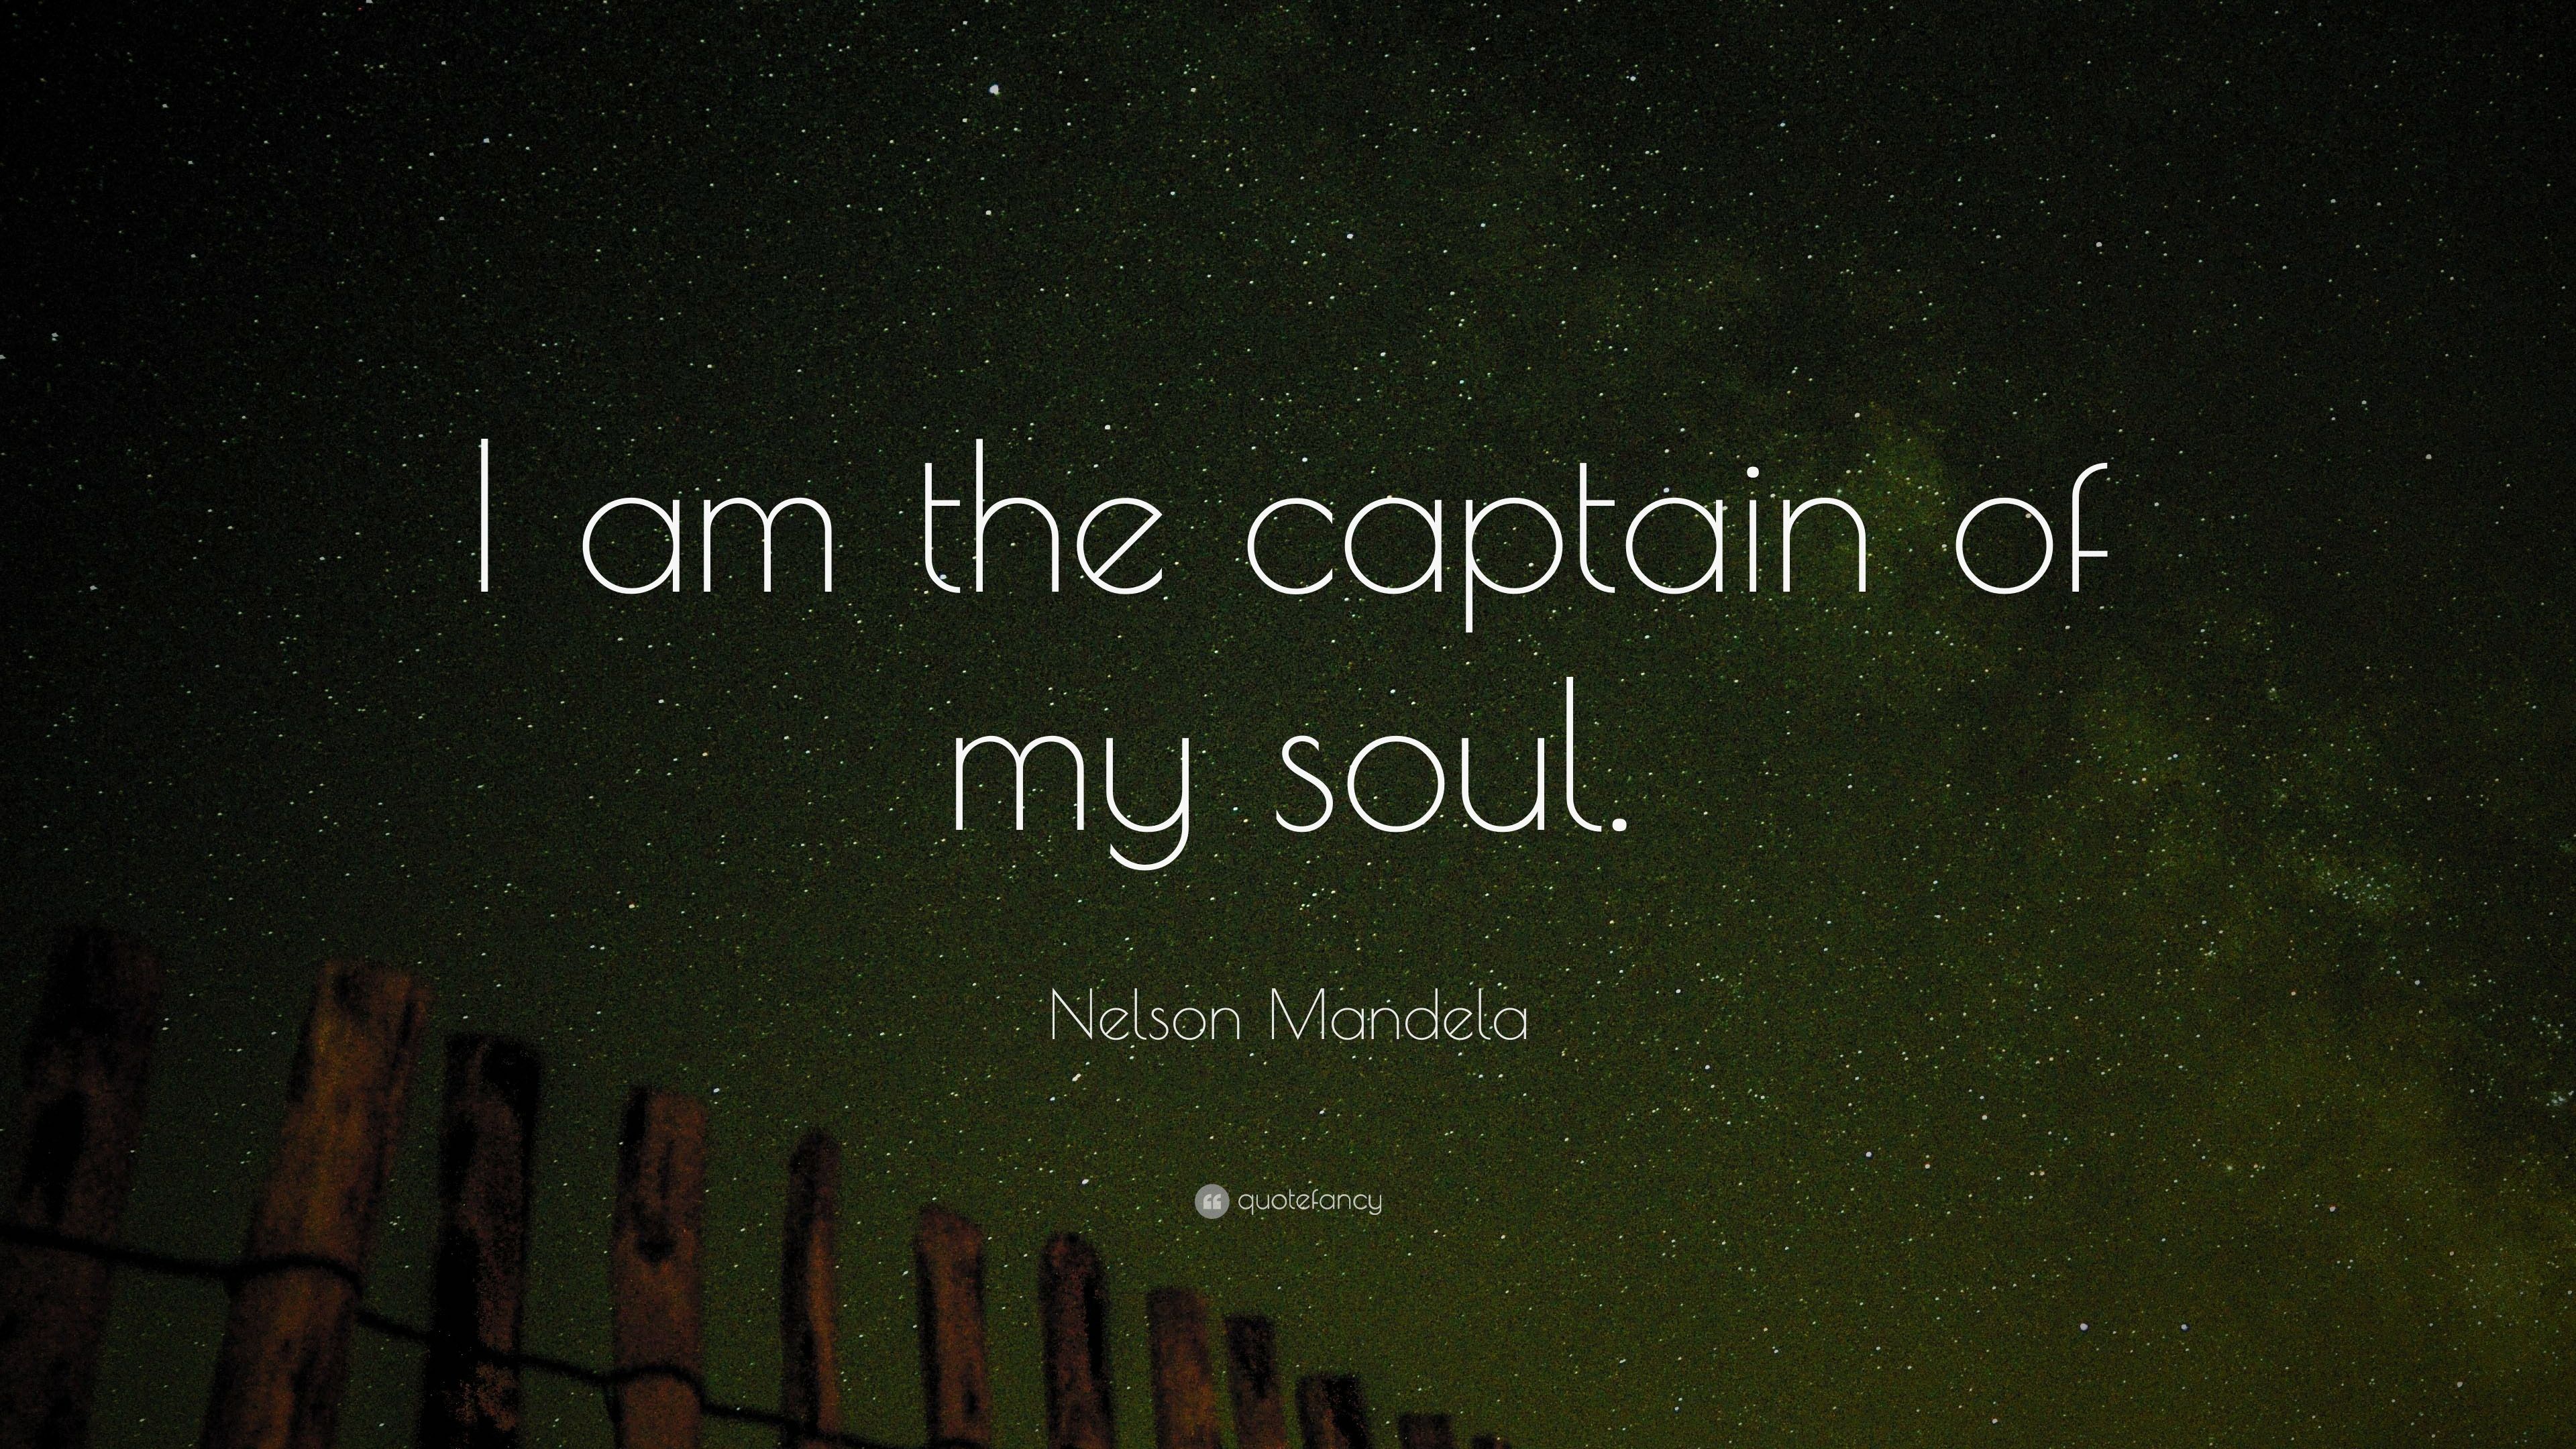 Nelson Mandela Quote: “I am the captain of my soul.” 22